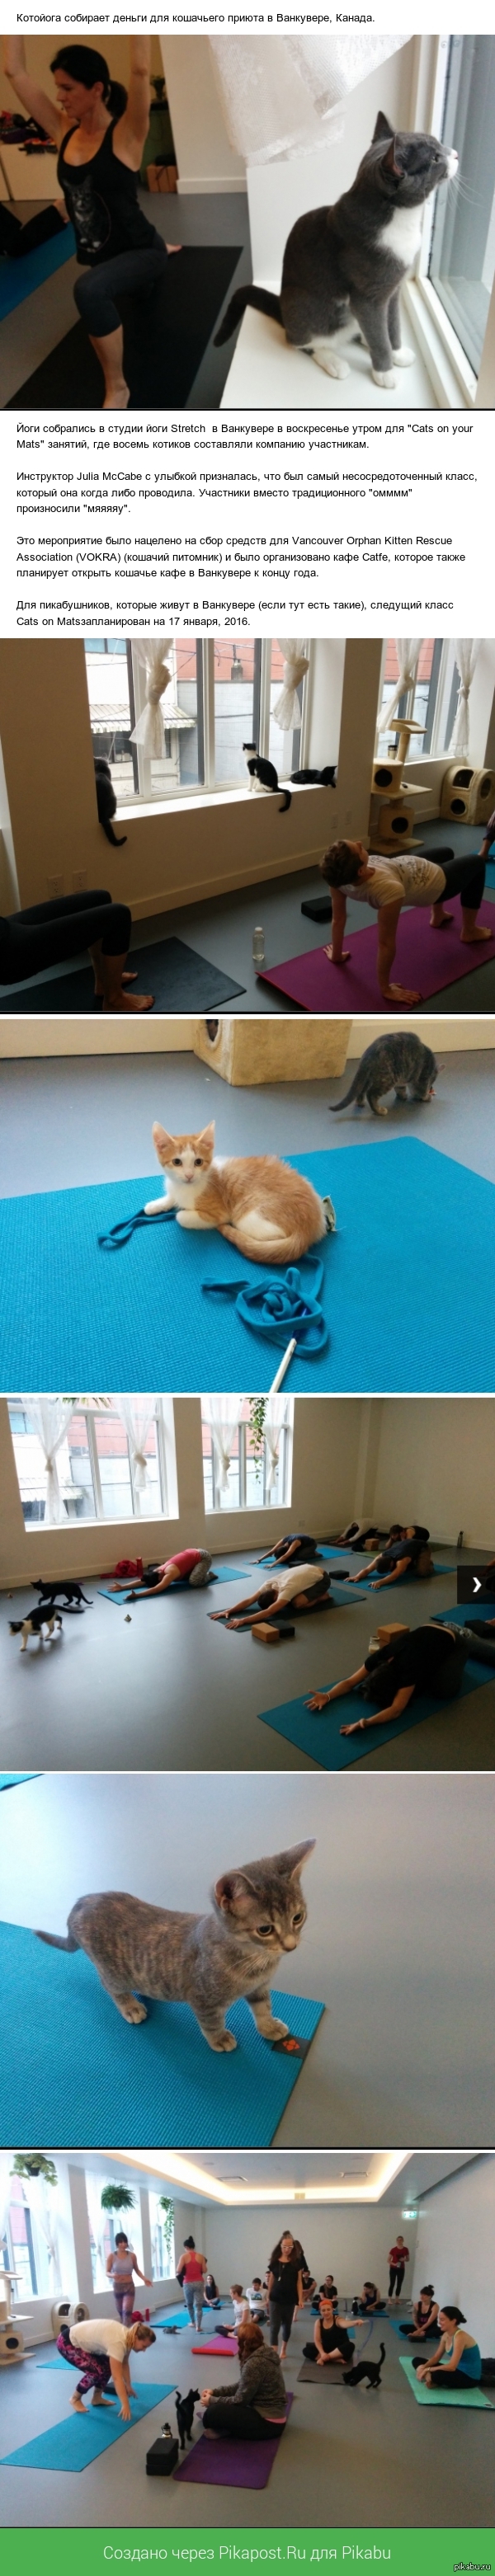        http://www.cbc.ca/news/yoga-with-cats-raises-money-for-orphaned-kitties-1.3236272